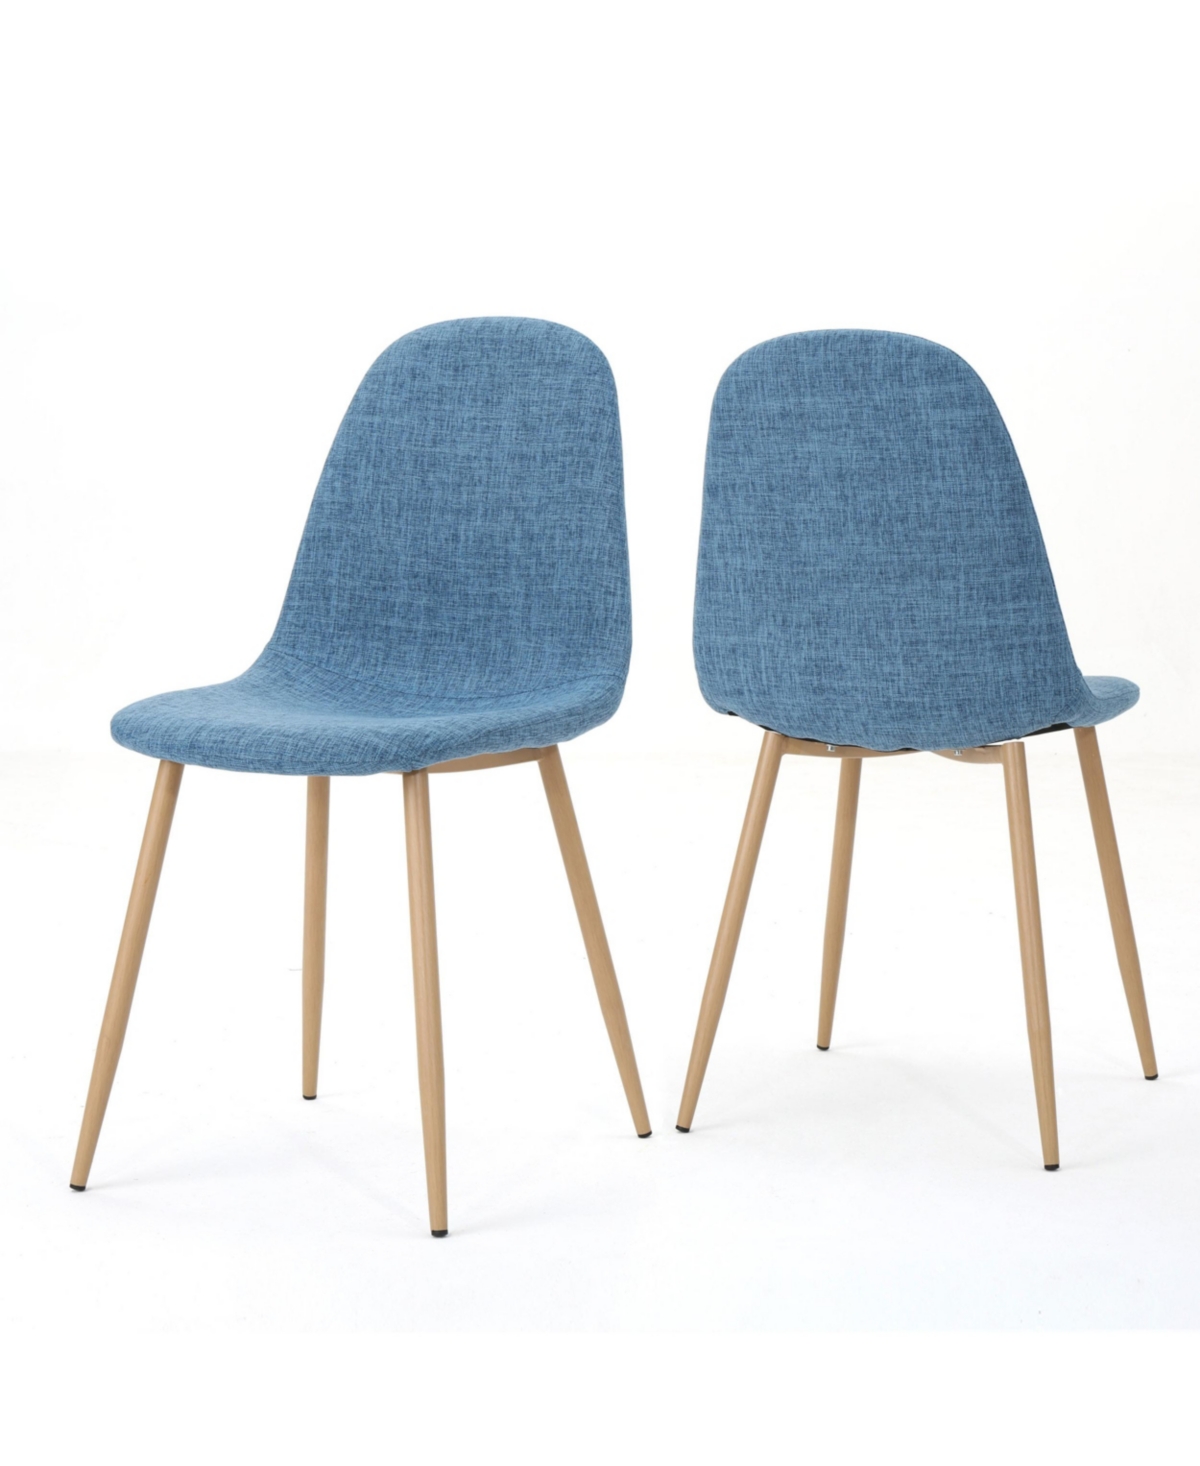 Noble House Raina Mid Century Modern Dining Chairs Set, 2 Piece In Blue